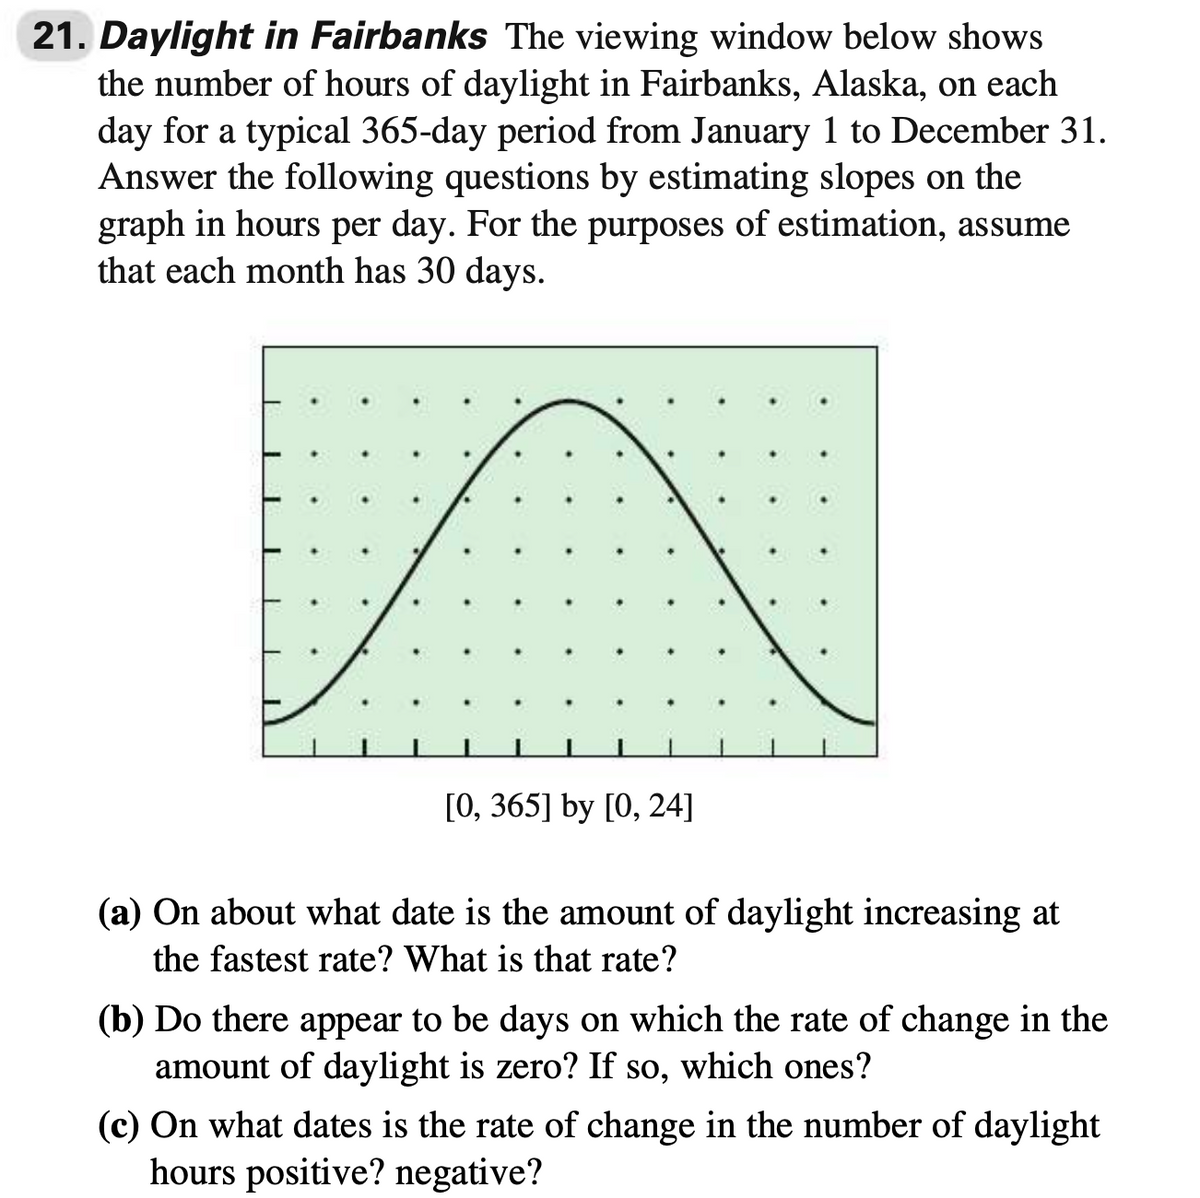 21. Daylight in Fairbanks The viewing window below shows
the number of hours of daylight in Fairbanks, Alaska, on each
day for a typical 365-day period from January 1 to December 31.
Answer the following questions by estimating slopes on the
graph in hours per day. For the purposes of estimation, assume
that each month has 30 days.
[0, 365] by [0, 24]
(a) On about what date is the amount of daylight increasing at
the fastest rate? What is that rate?
(b) Do there appear to be days on which the rate of change in the
amount of daylight is zero? If so, which ones?
(c) On what dates is the rate of change in the number of daylight
hours positive? negative?